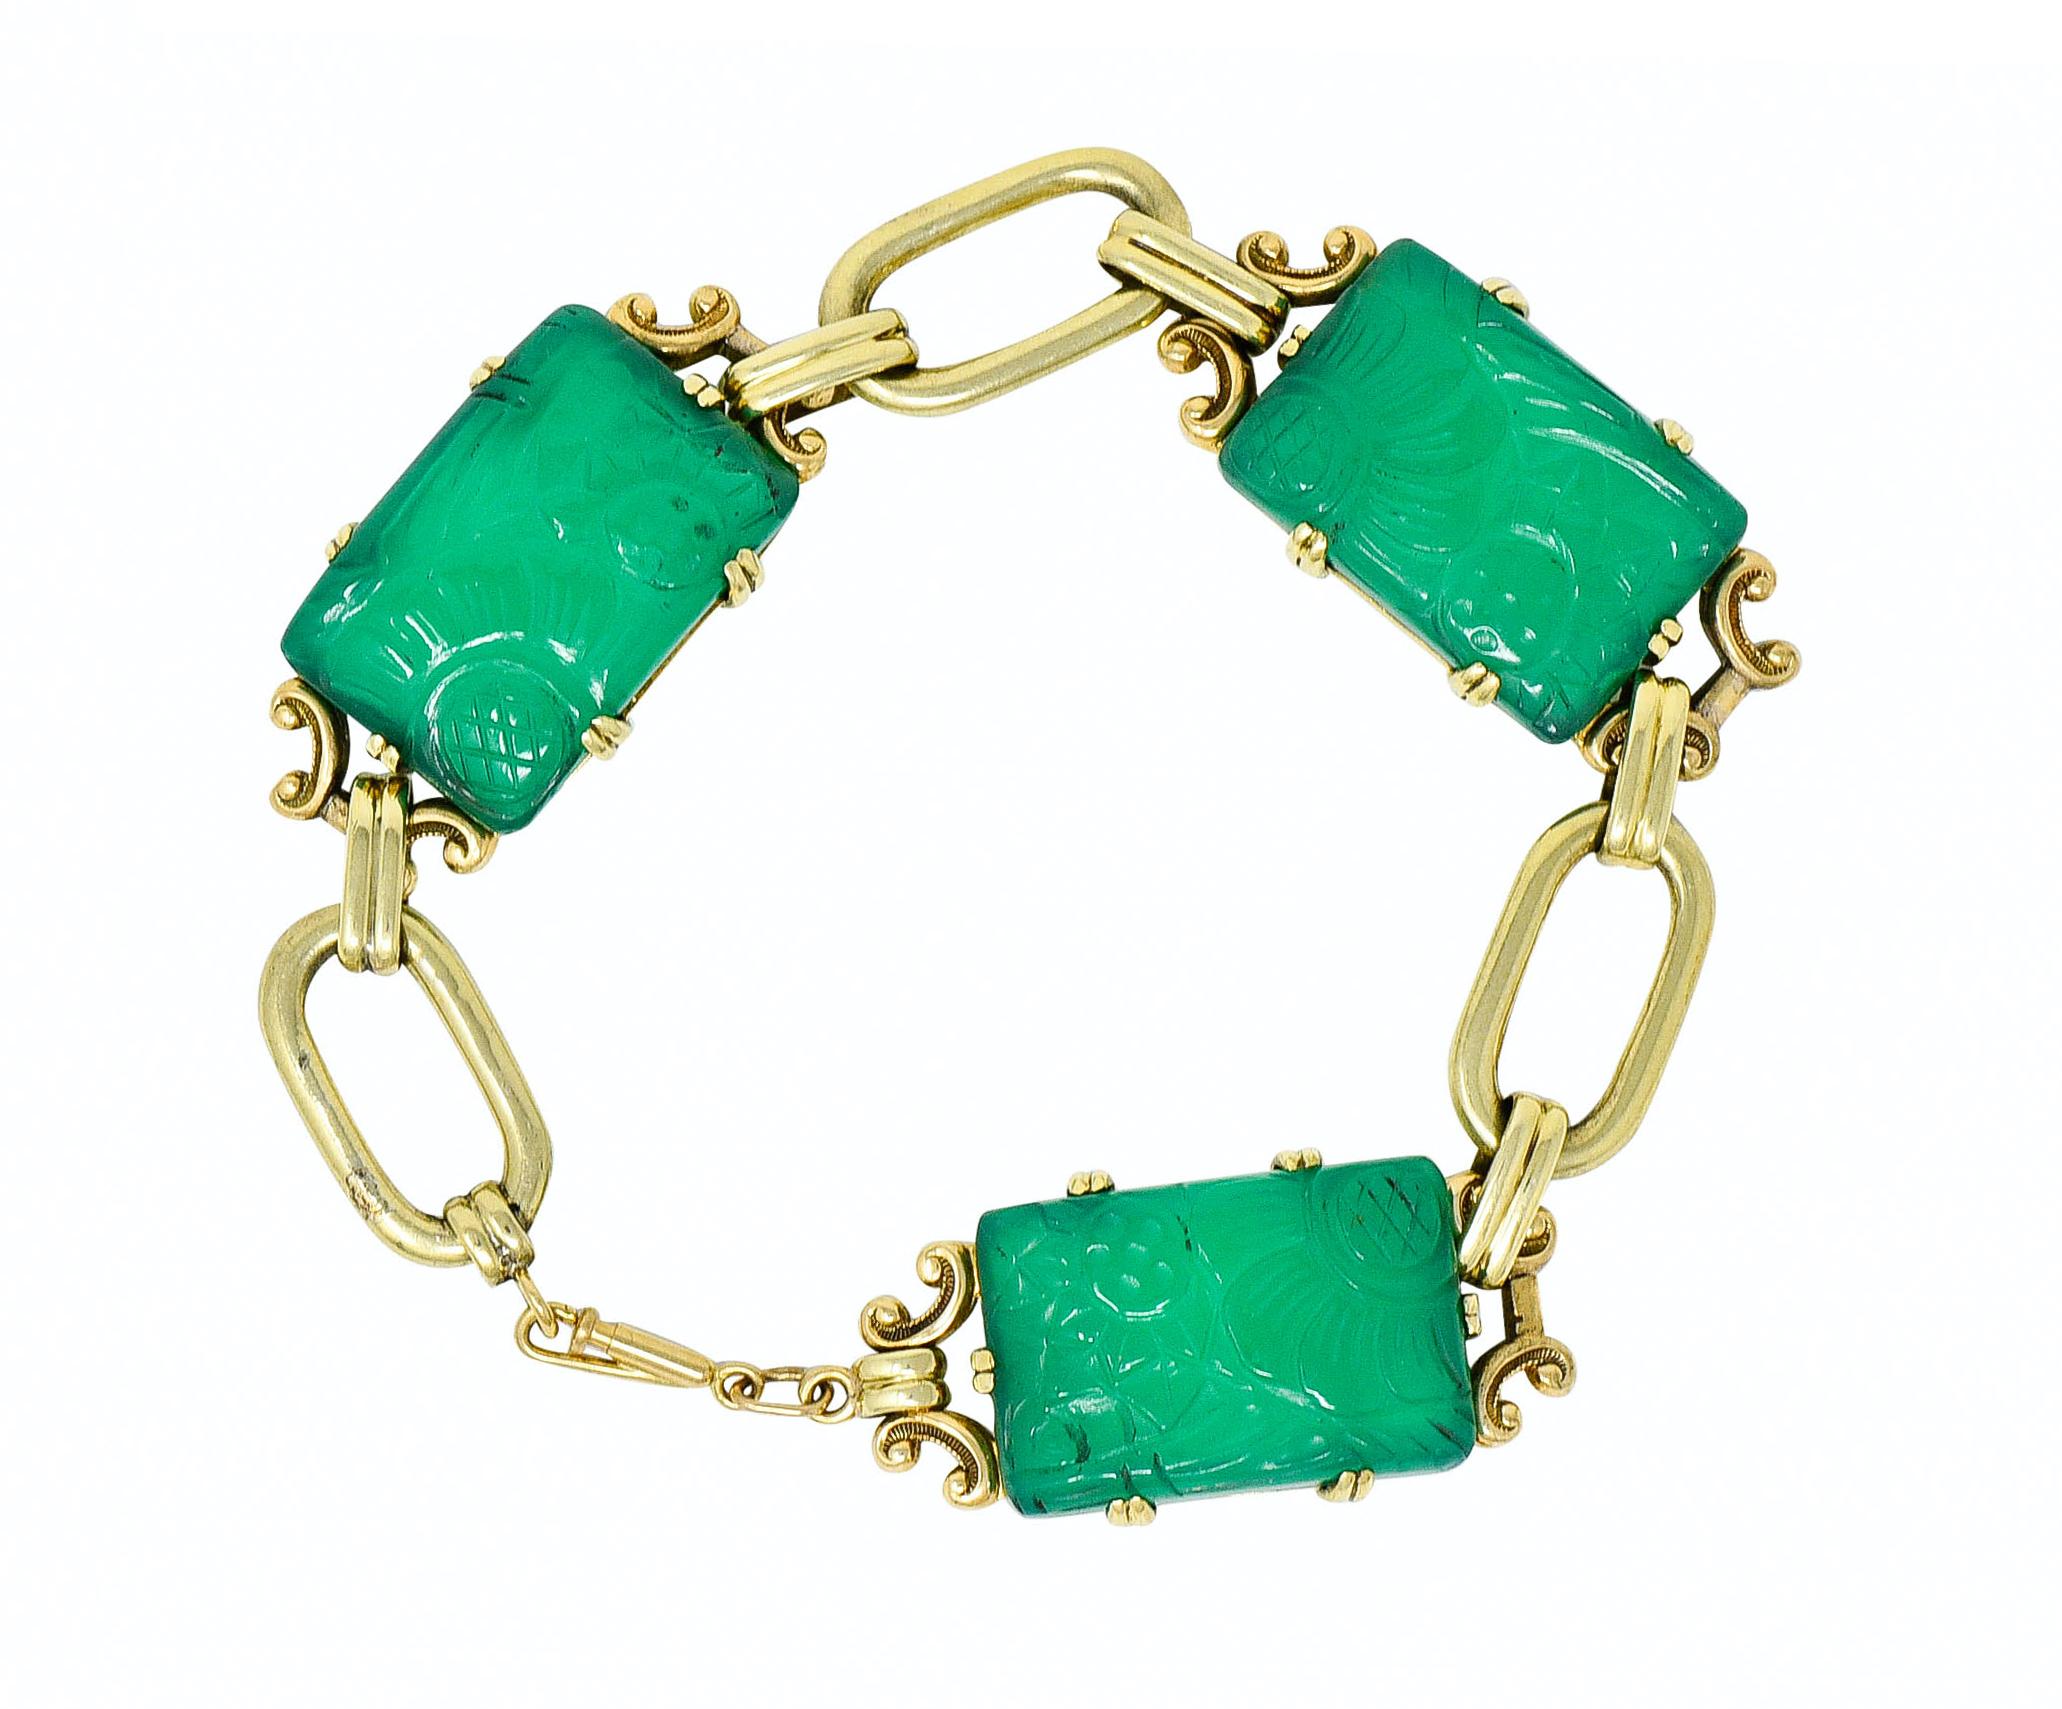 Centering three rectangular tablets of chrysoprase, each measuring approximately 15.1 x 22.2 mm

A very well-matched translucent bluish-green color and deeply carved to depict a floral motif

Prong set in ornate whiplash frames, alternating with